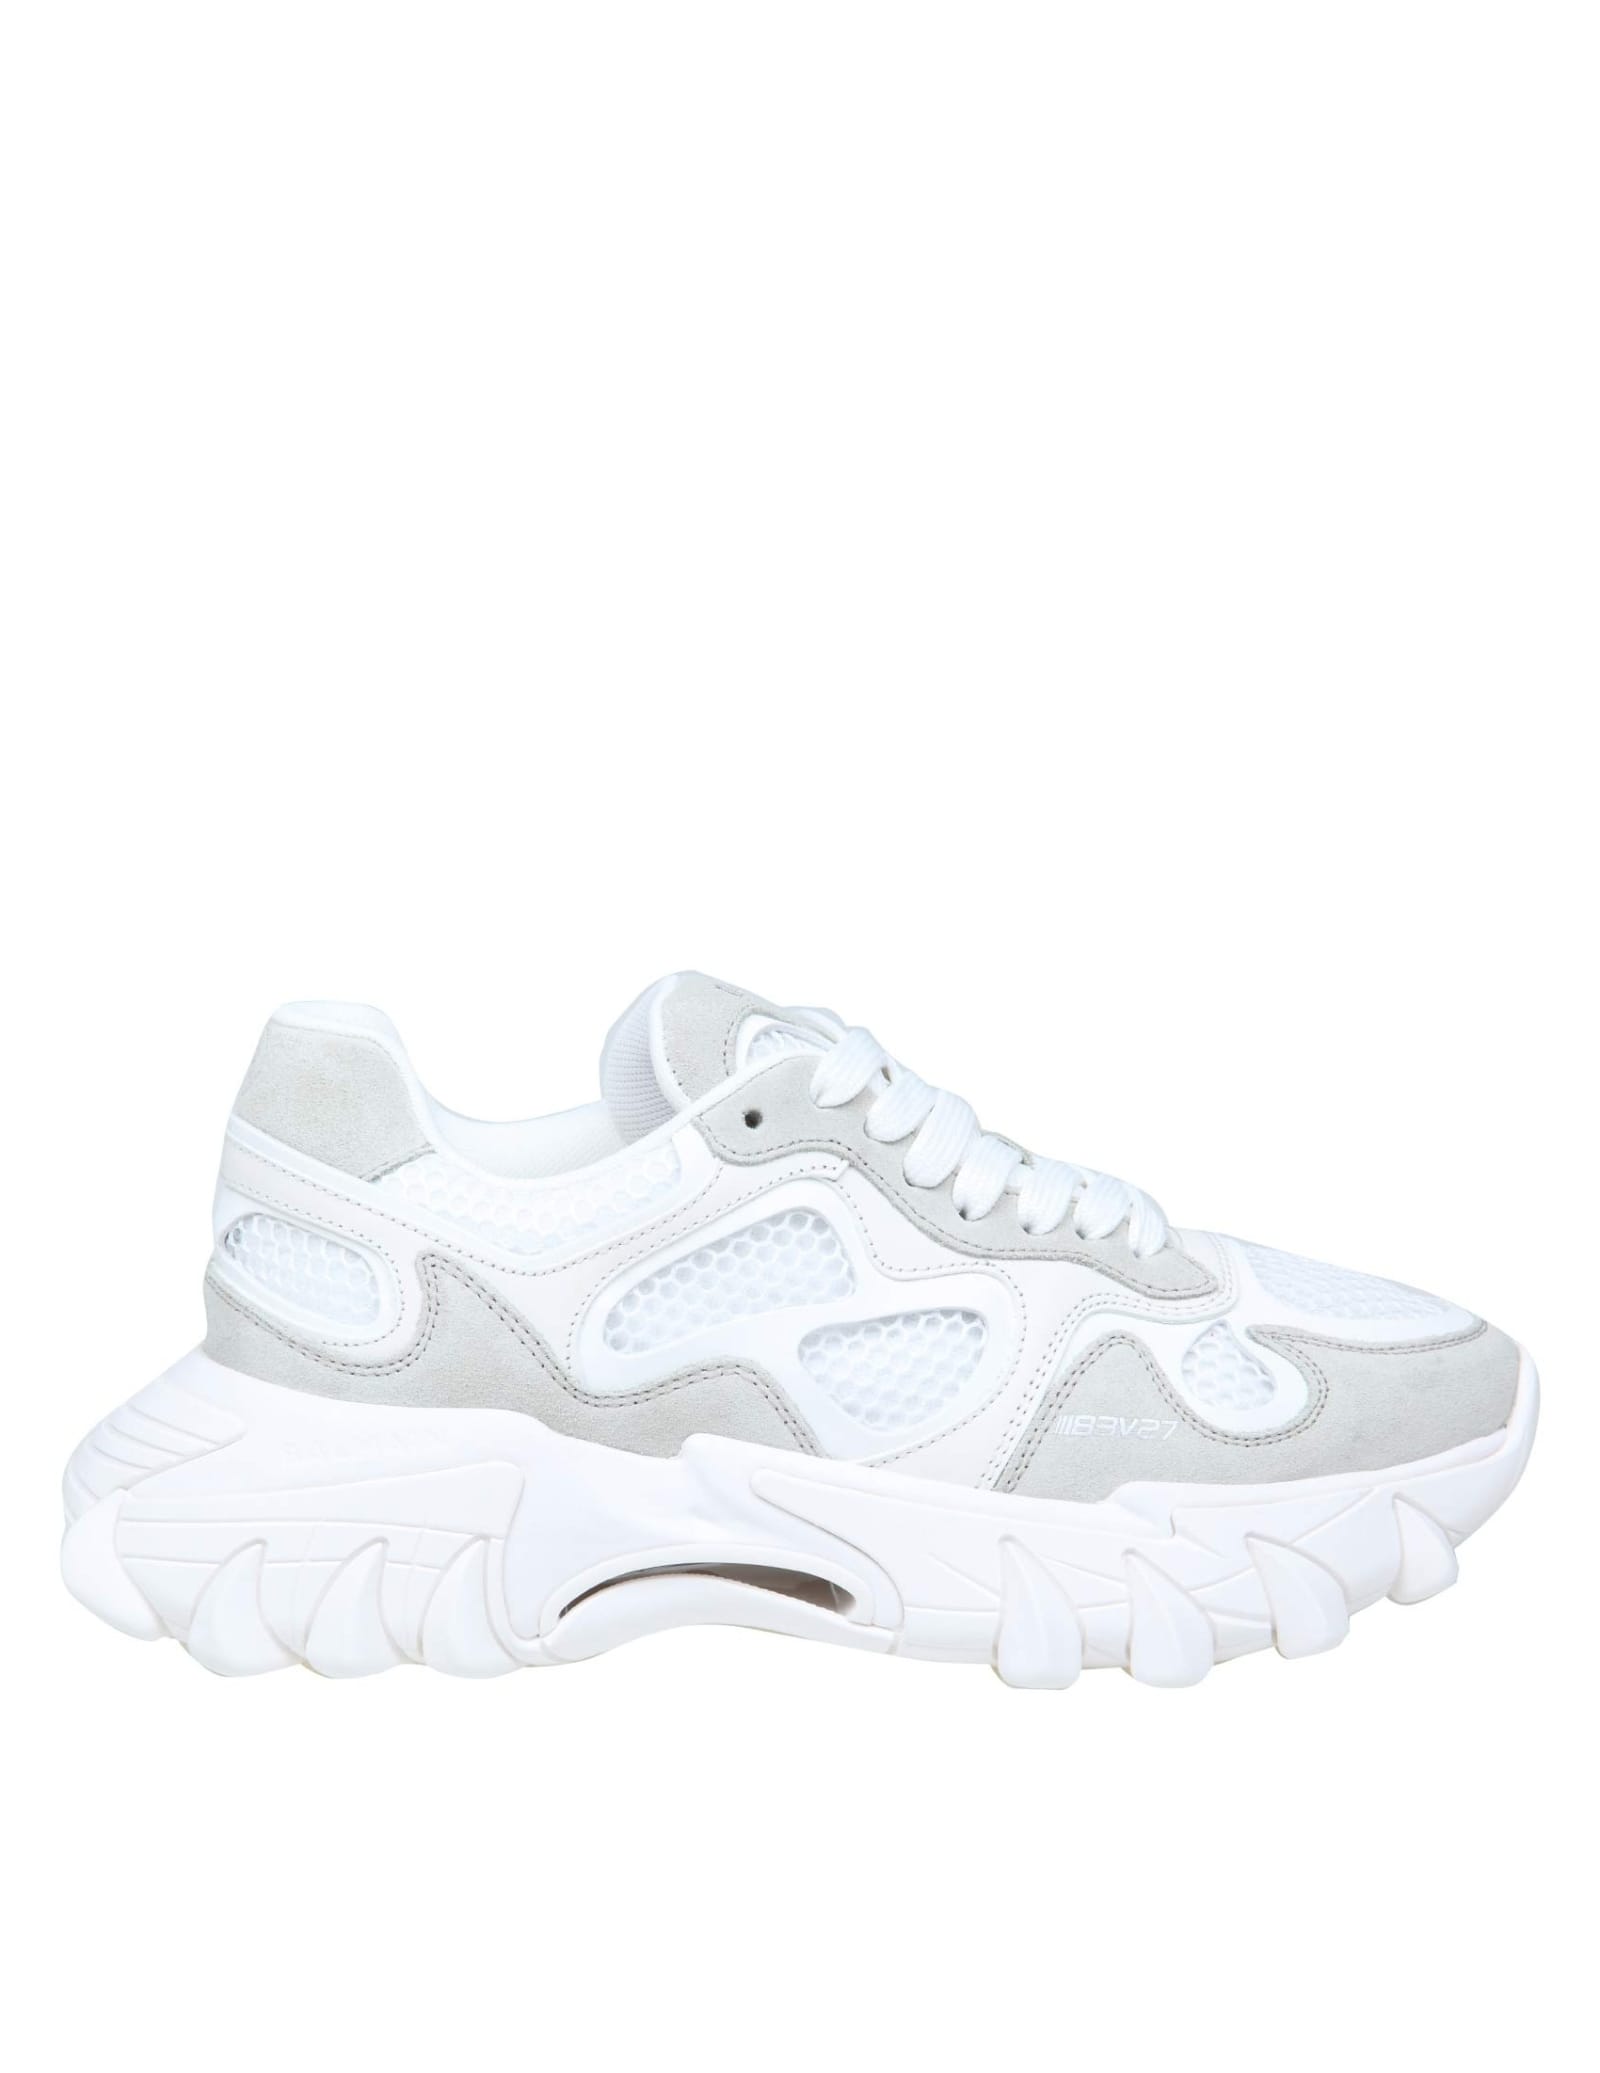 Balmain B-east Sneakers In White Leather And Mesh